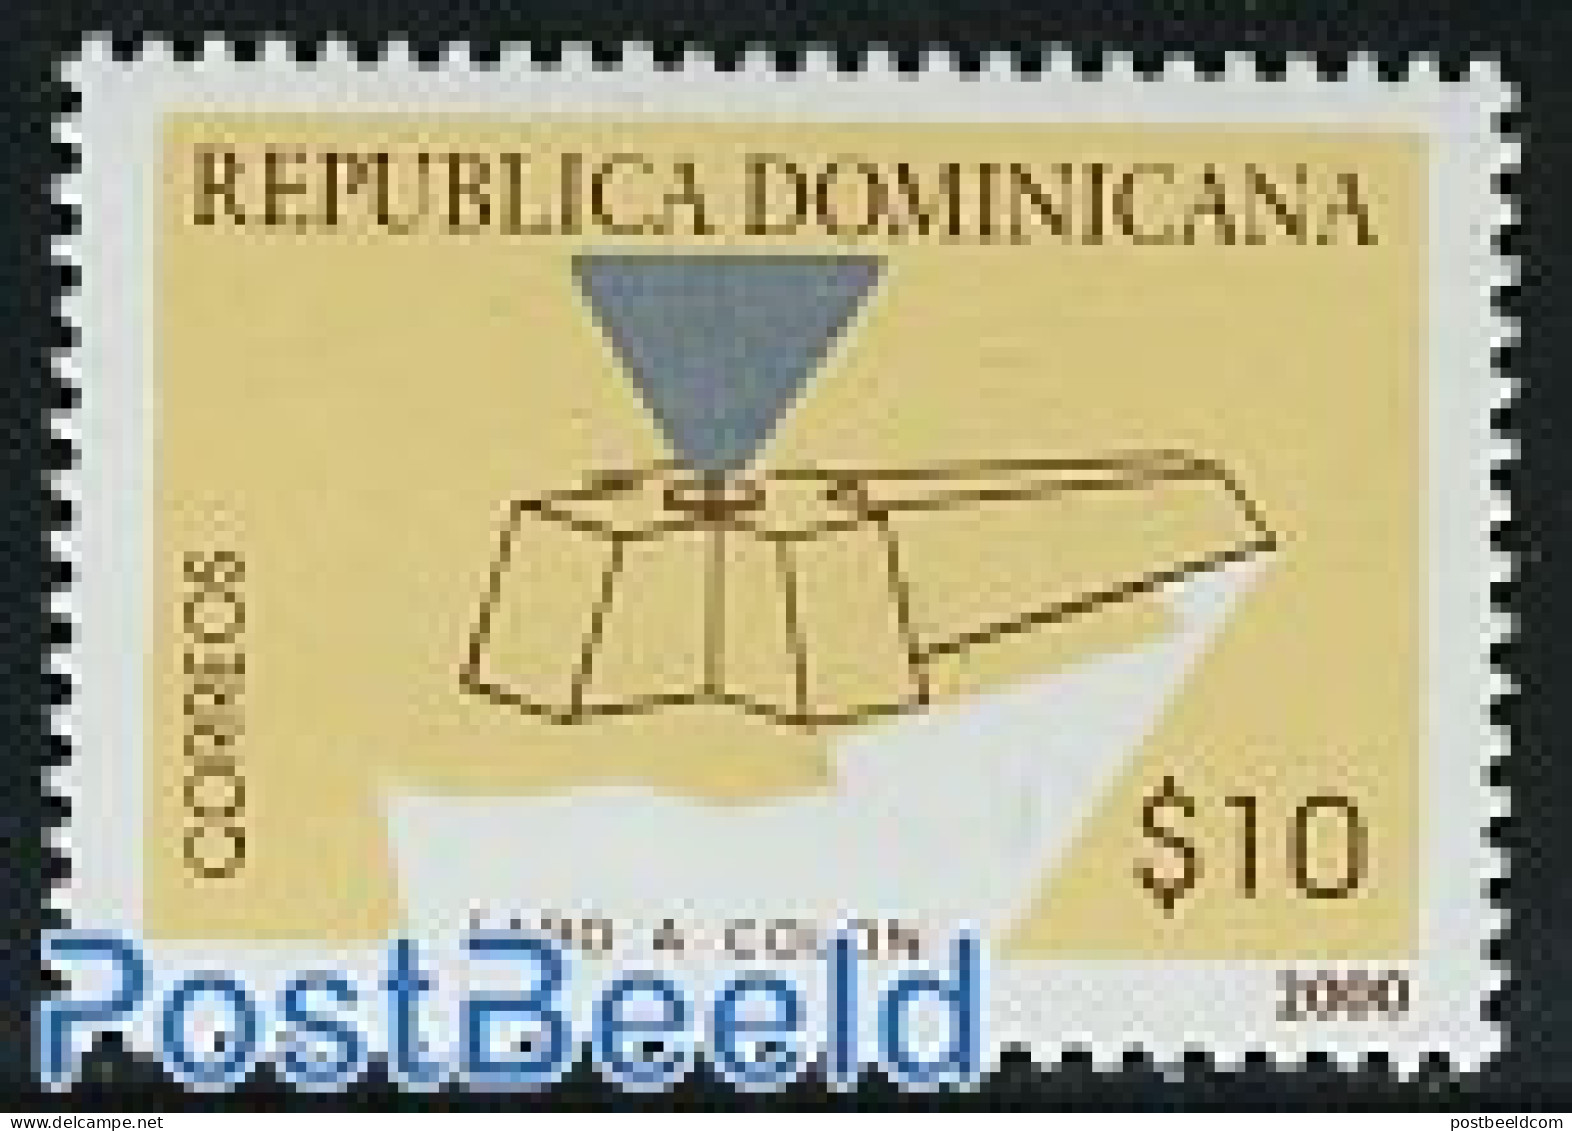 Dominican Republic 2000 Columbus Lighthouse 1v (yellow/silver), Mint NH, Various - Lighthouses & Safety At Sea - Phares